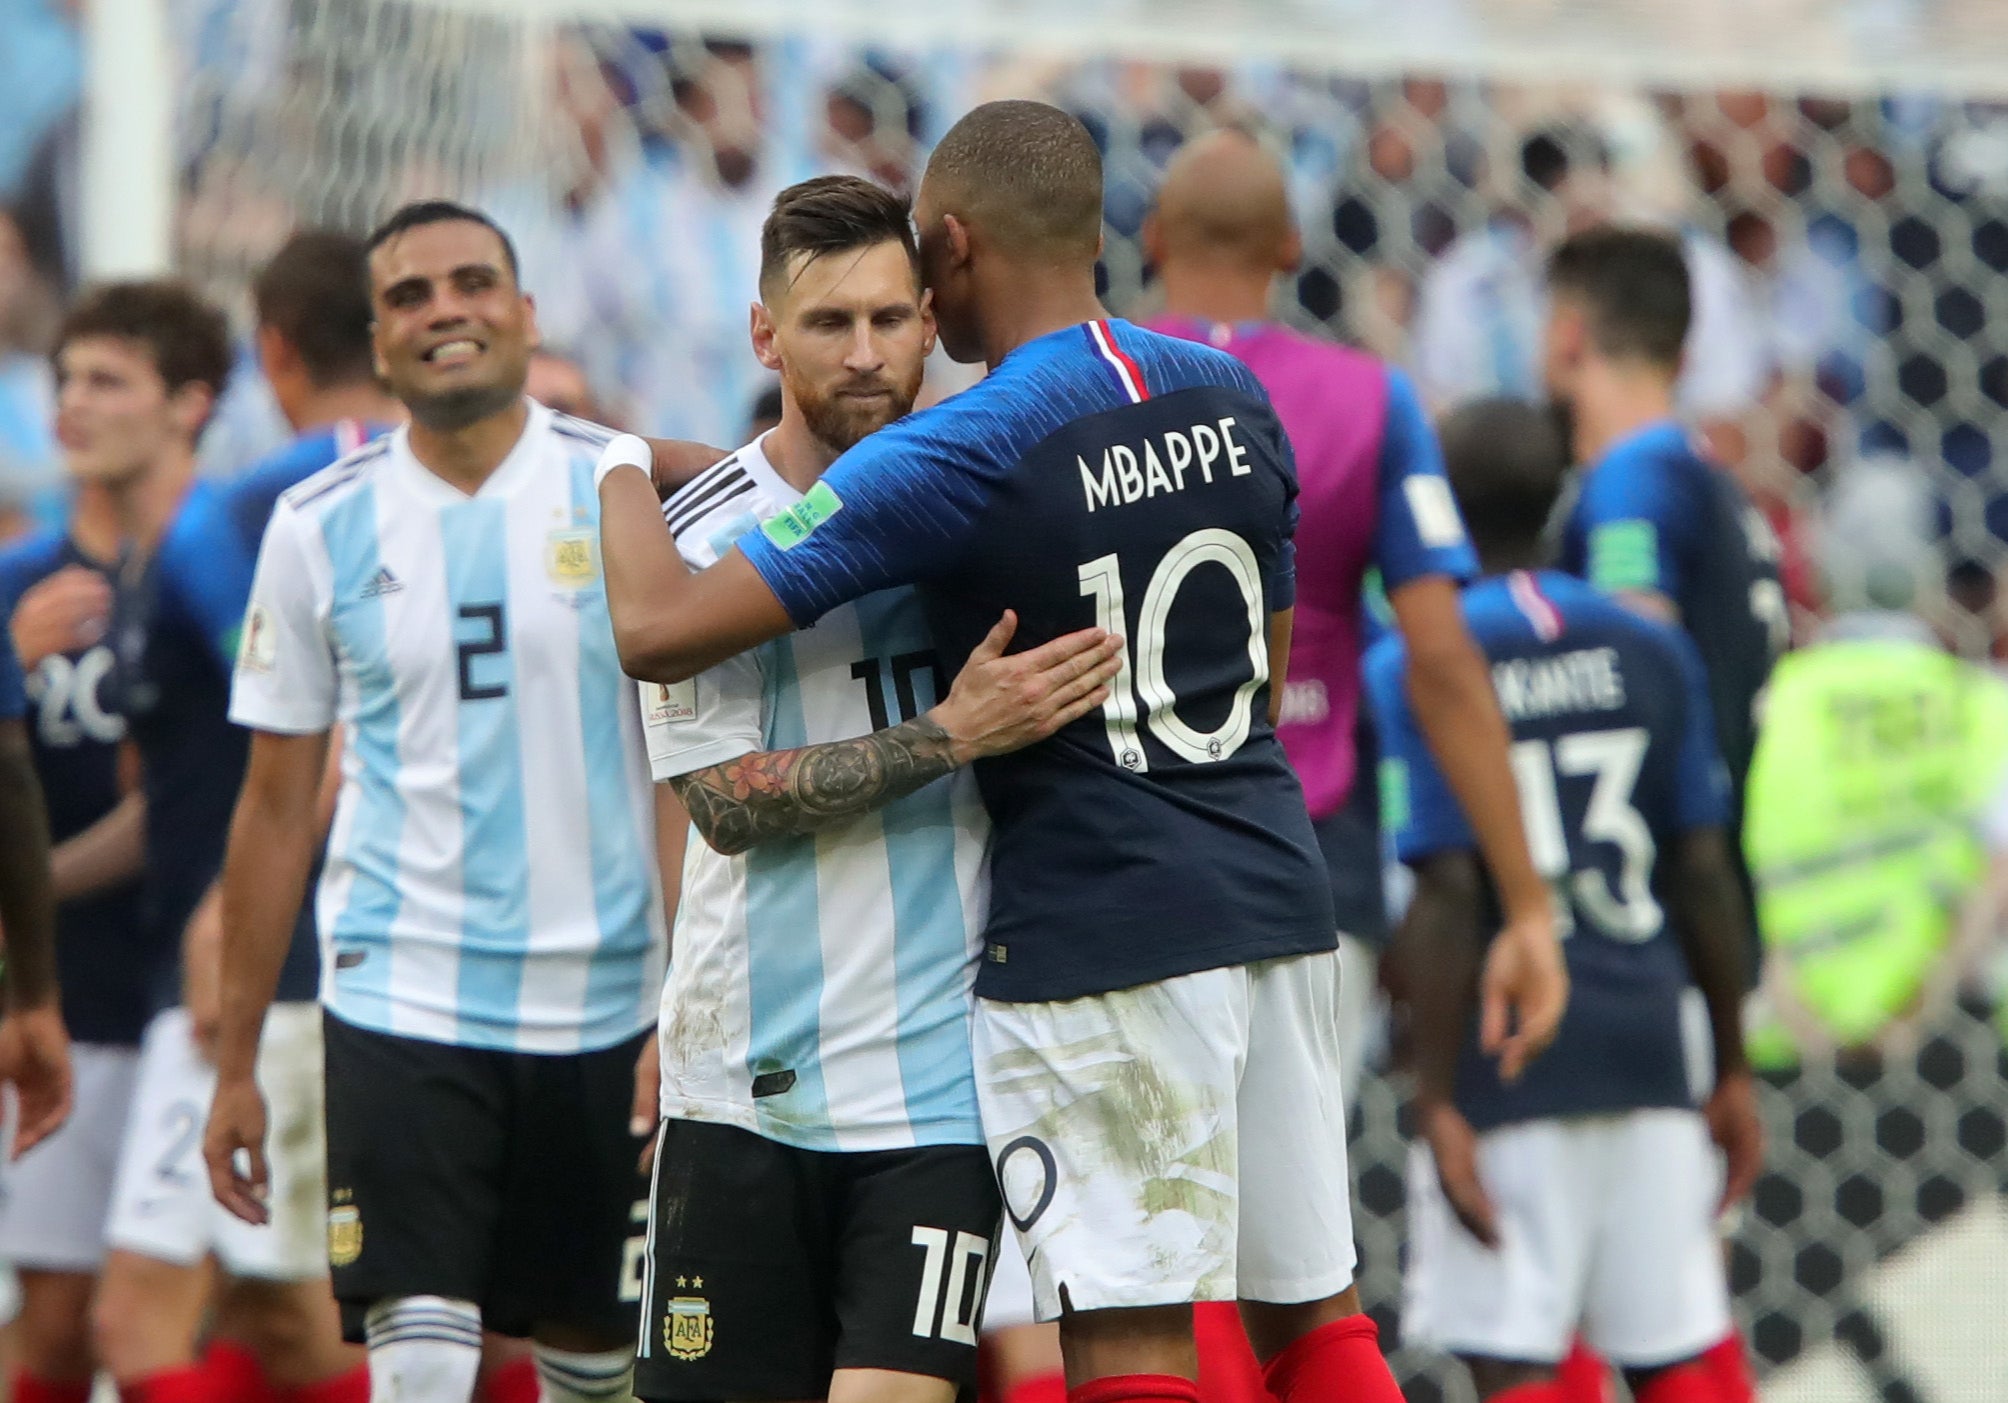 Mbappe vs Messi will be a defining battle four years after they met in the World Cup in Russia